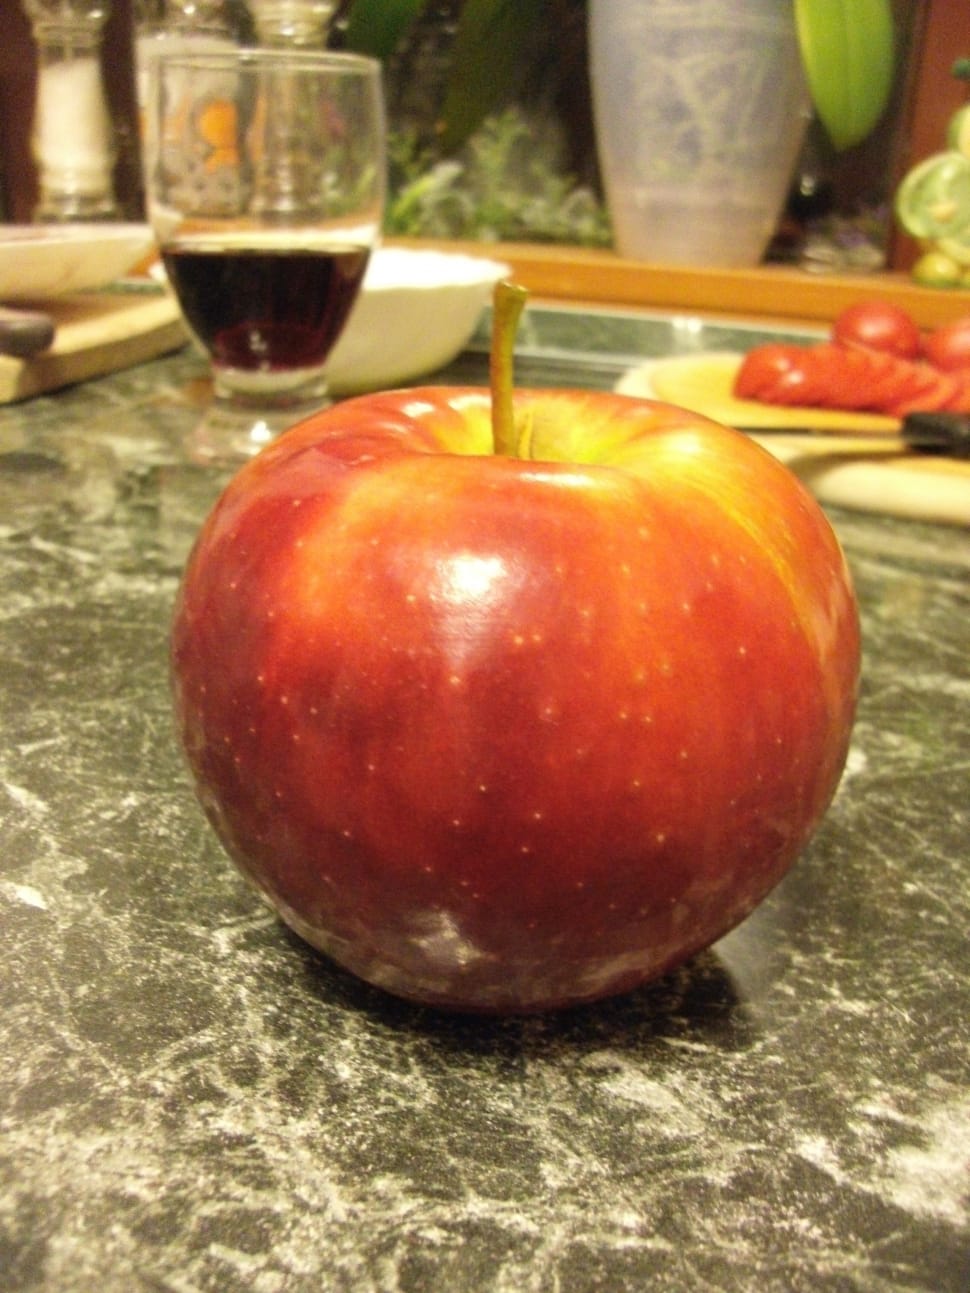 red apple fruit preview